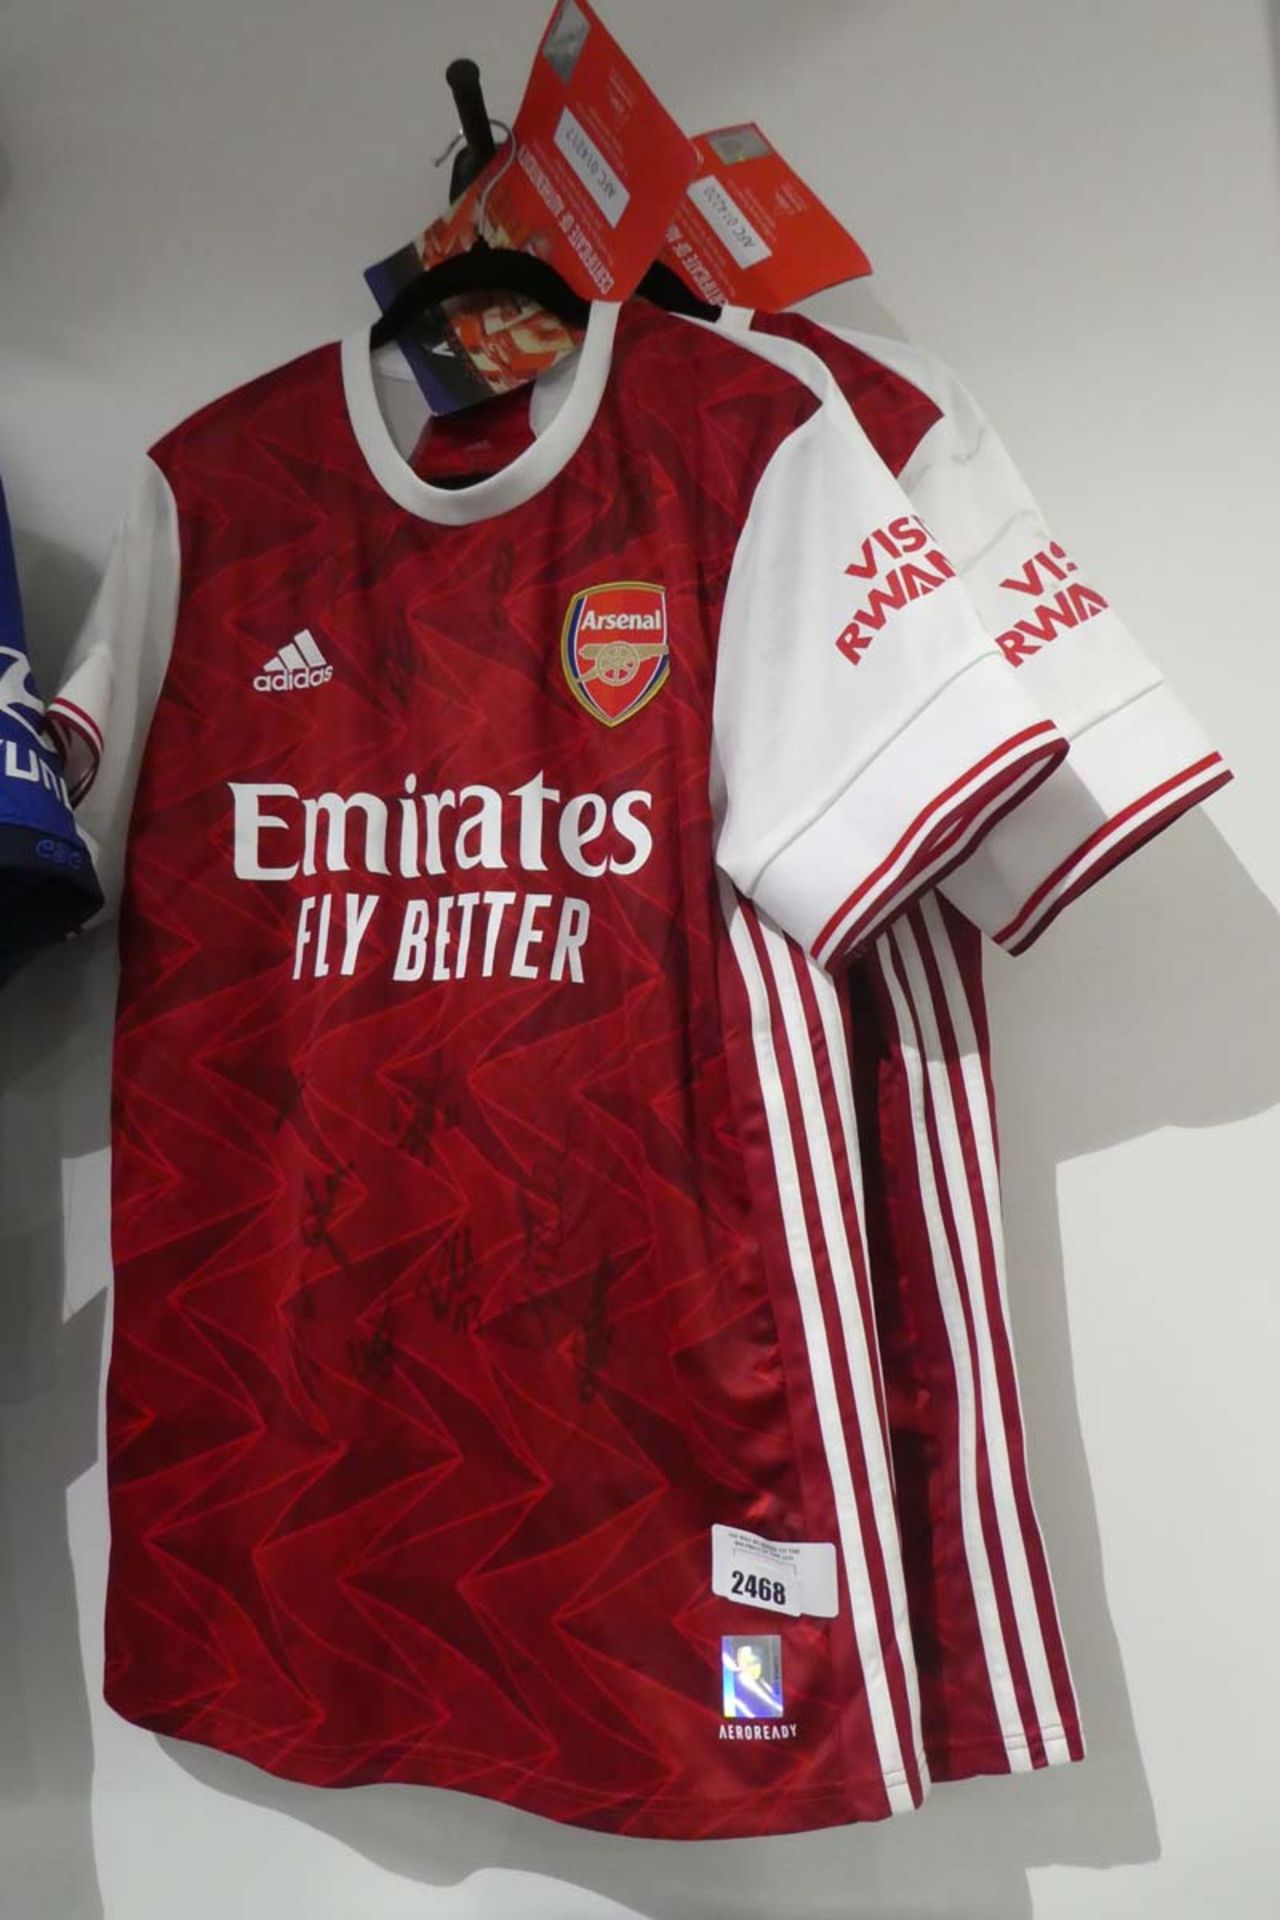 Singed team Arsenal shirt with 2 signed footballs with COA